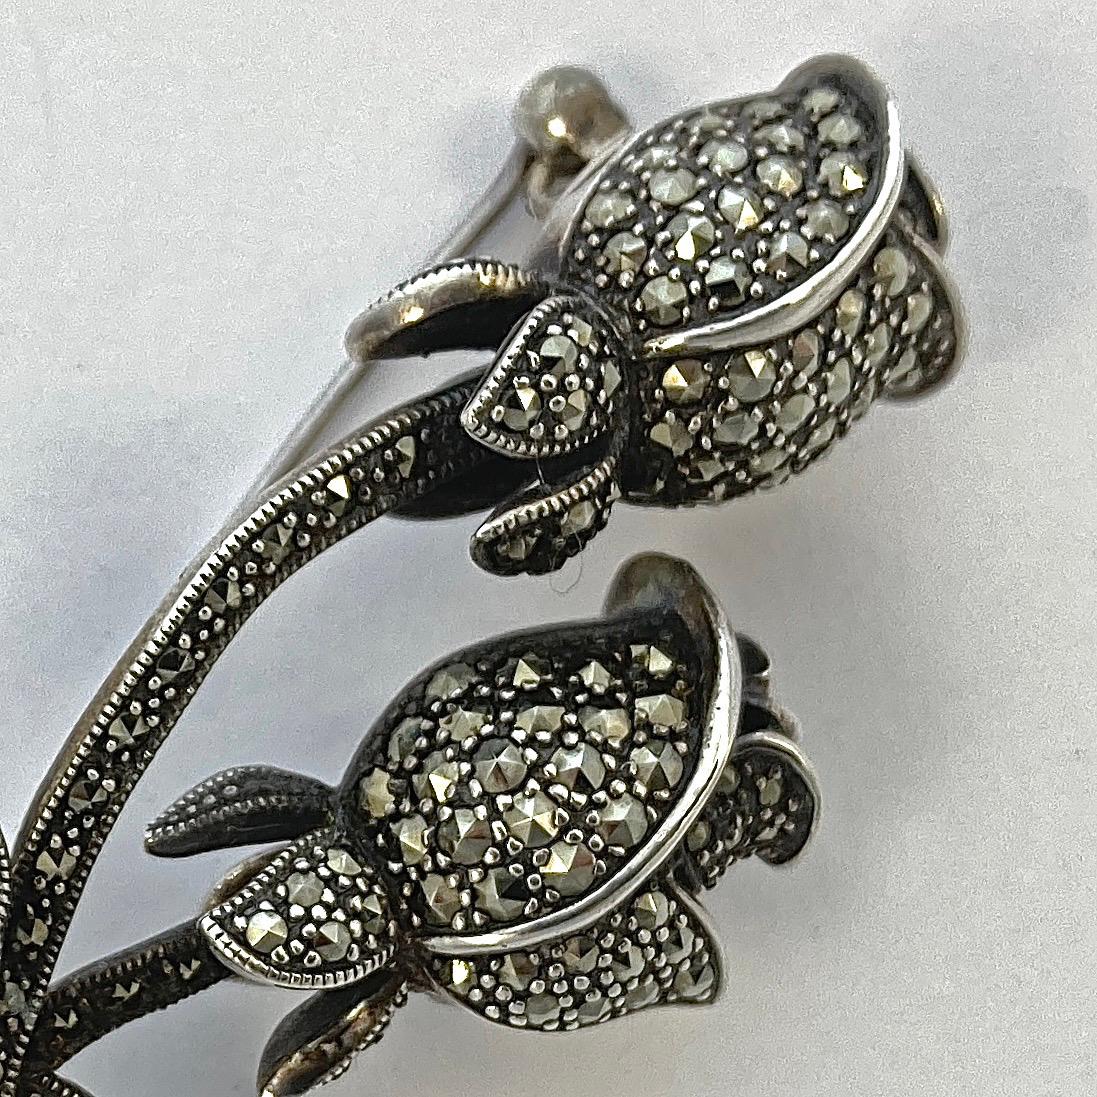 Beautiful sterling silver brooch featuring a double rosebud design, and embellished with marcasites and silver decoration. Measuring length 6cm / 2.36 inches. It is in very good condition, we have given the brooch a light clean.

This is a vintage